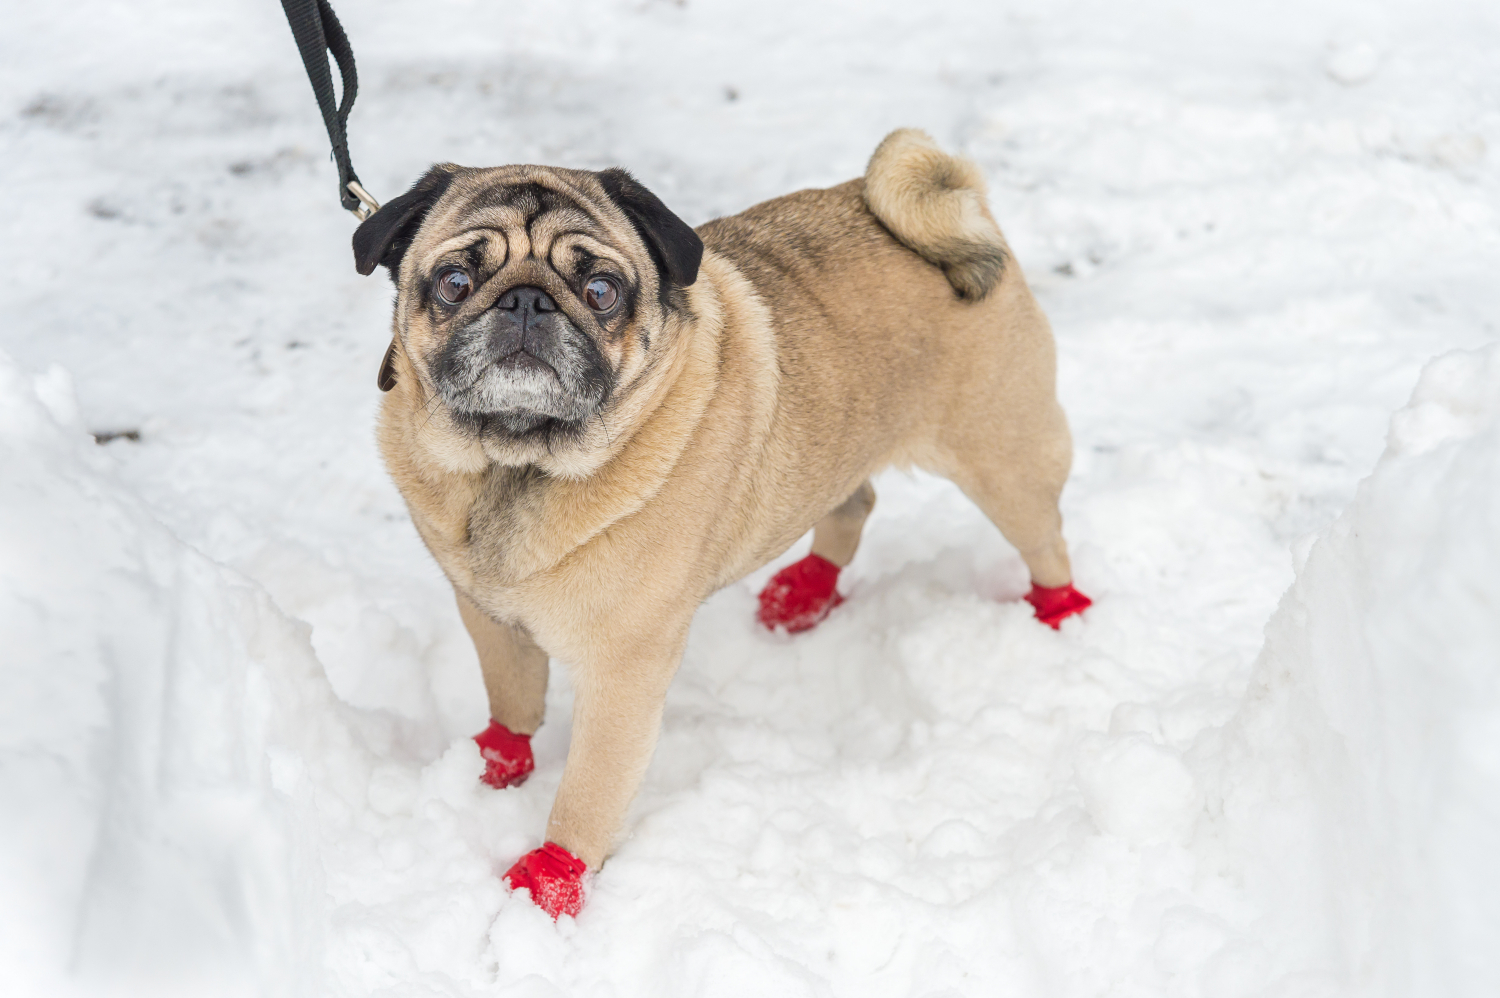 pug wearing red boots in the snow